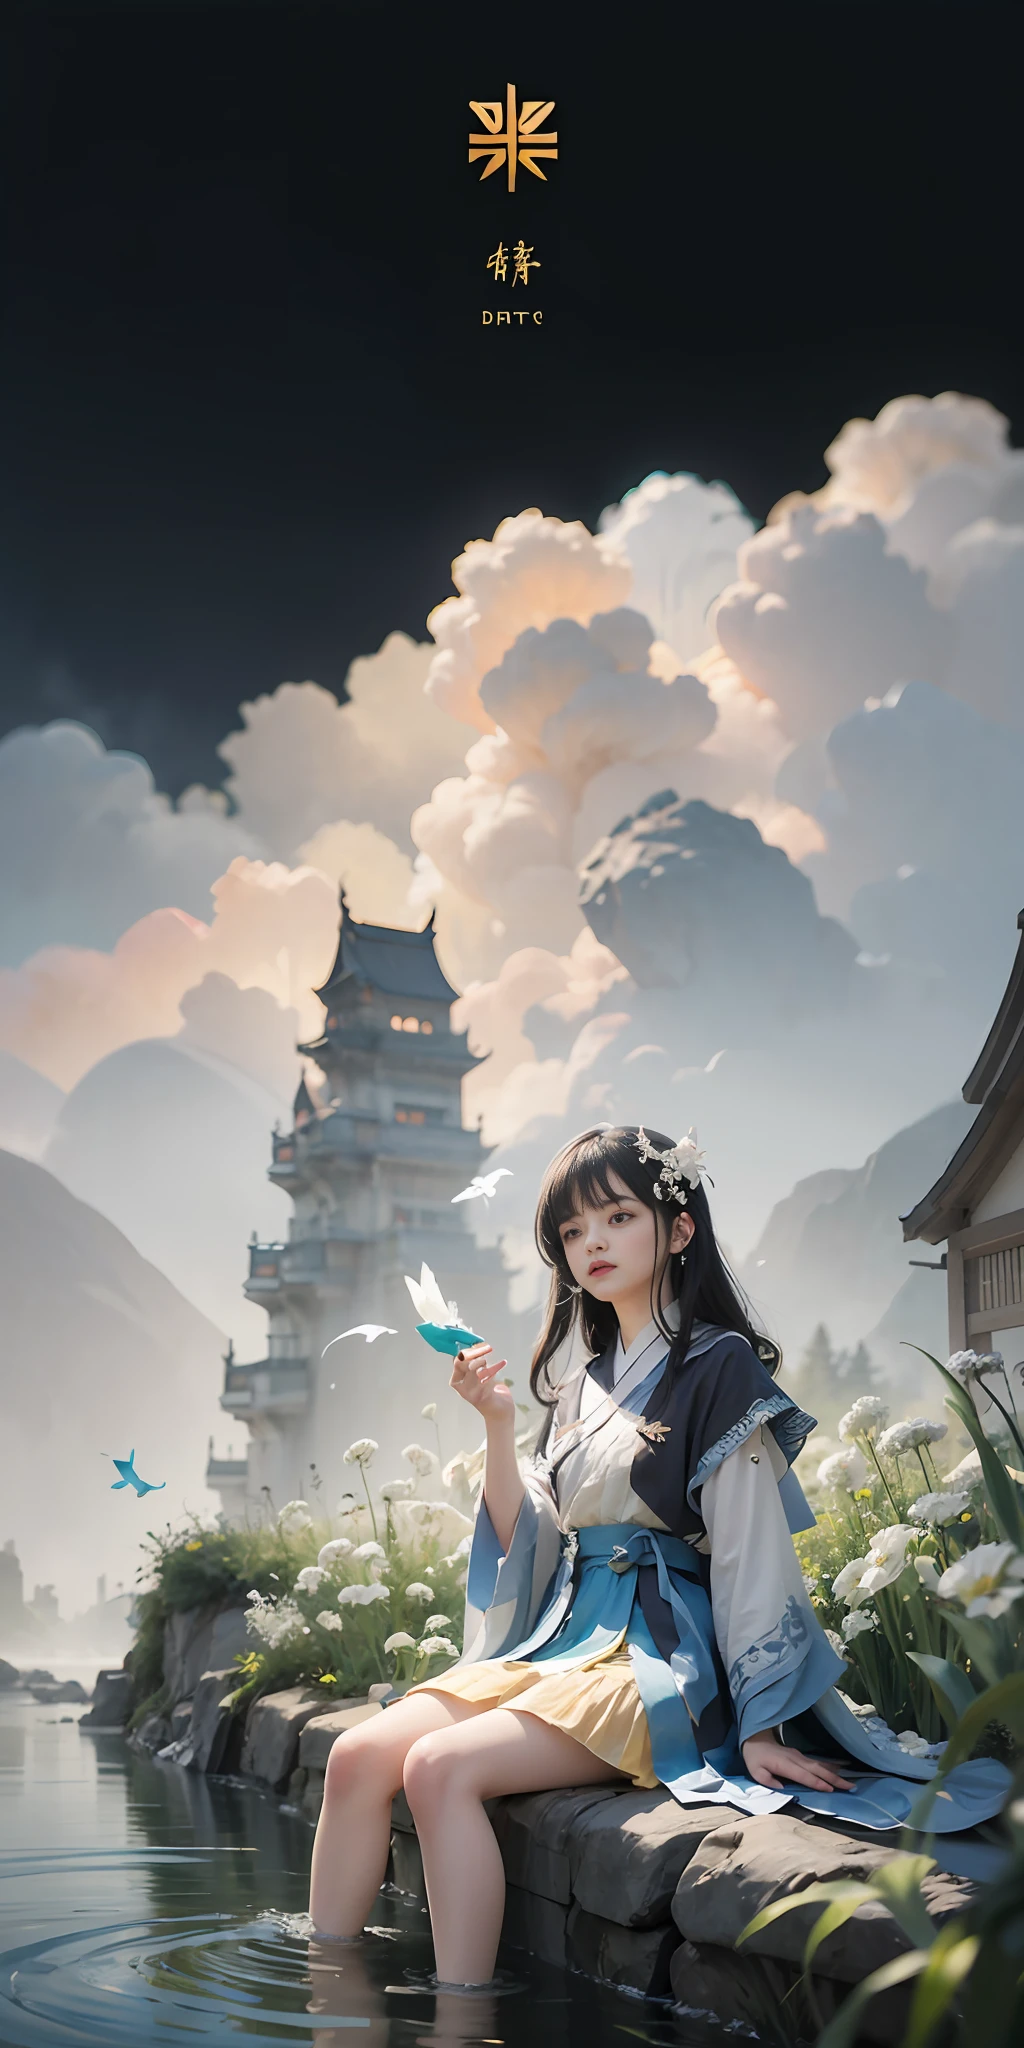 (Fidelity: 1.4), Best Quality, Masterpiece, Ultra High Resolution, Poster, Fantasy Art, Dynamic Lighting, Art Station, Poster, Volume Lighting, Very Detailed Faces, 4k Wallpaper, Award-Awarded, Chinese Style, A Woman, Side Face, Quiet, Sad, Blue Hanfu, Tulle Coat, Long Black Hair, Light Blue Fringed Hair Ornament, Hairpins, White Ribbons, White Flower Bushes, Large White Flowers, Light Blue Small Flowers, Light Blue Butterflies Flying, Ancient Chinese Garden, Sitting by the Pond, Carp in the Water, Hazy Mist, background bamboo, small bamboo, birds flying, dramatic composition, movie lighting effects,